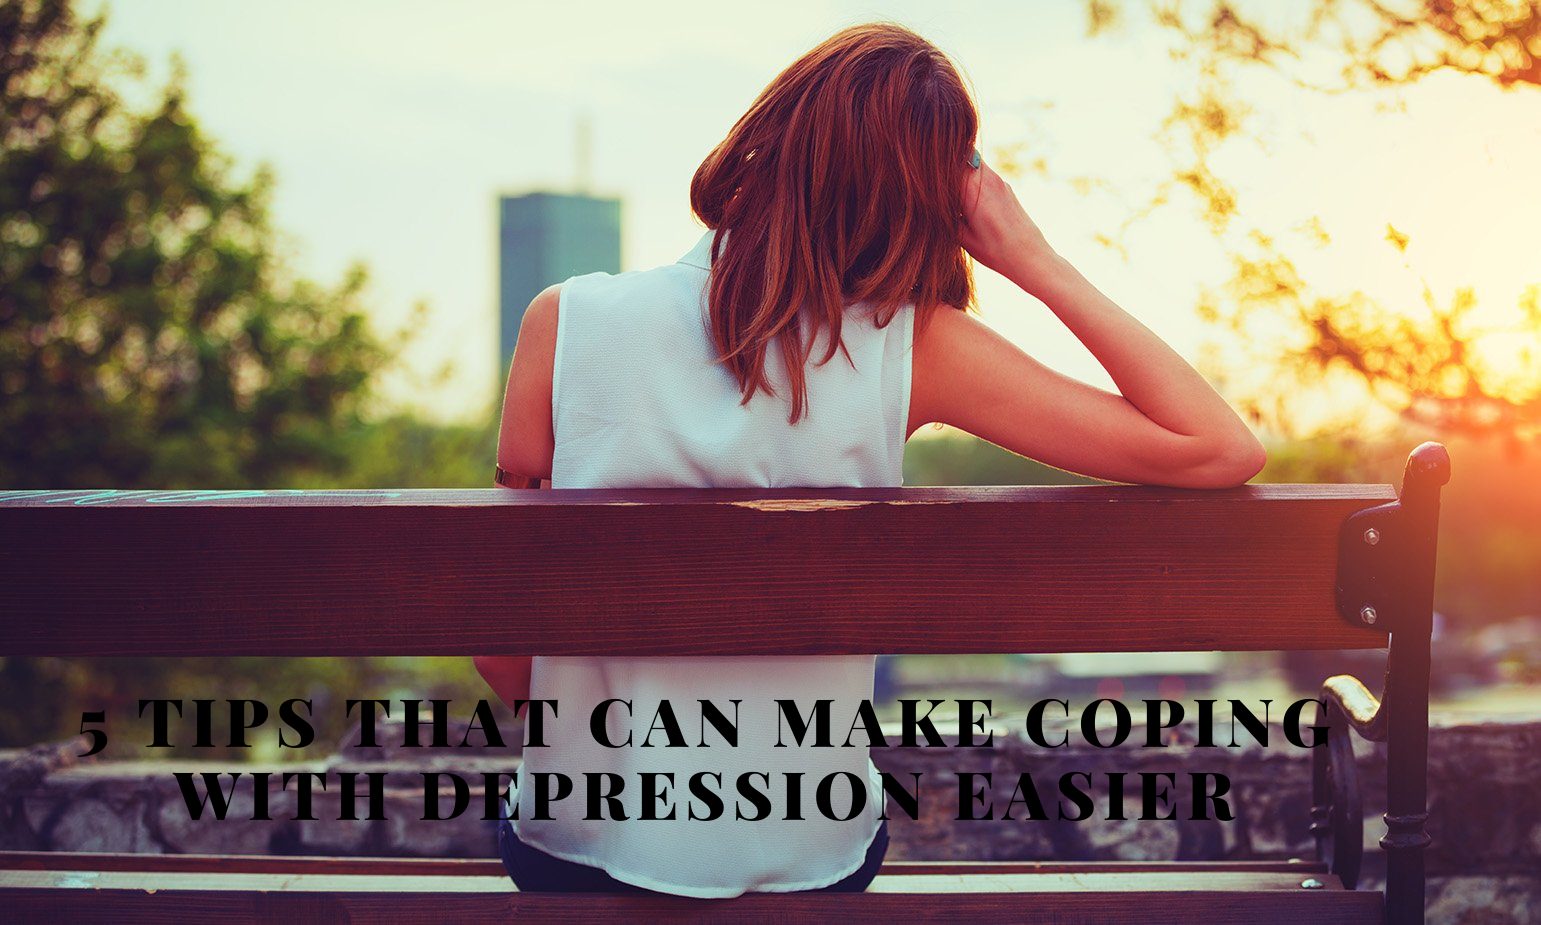 5 Tips That Can Make Coping with Depression Easier